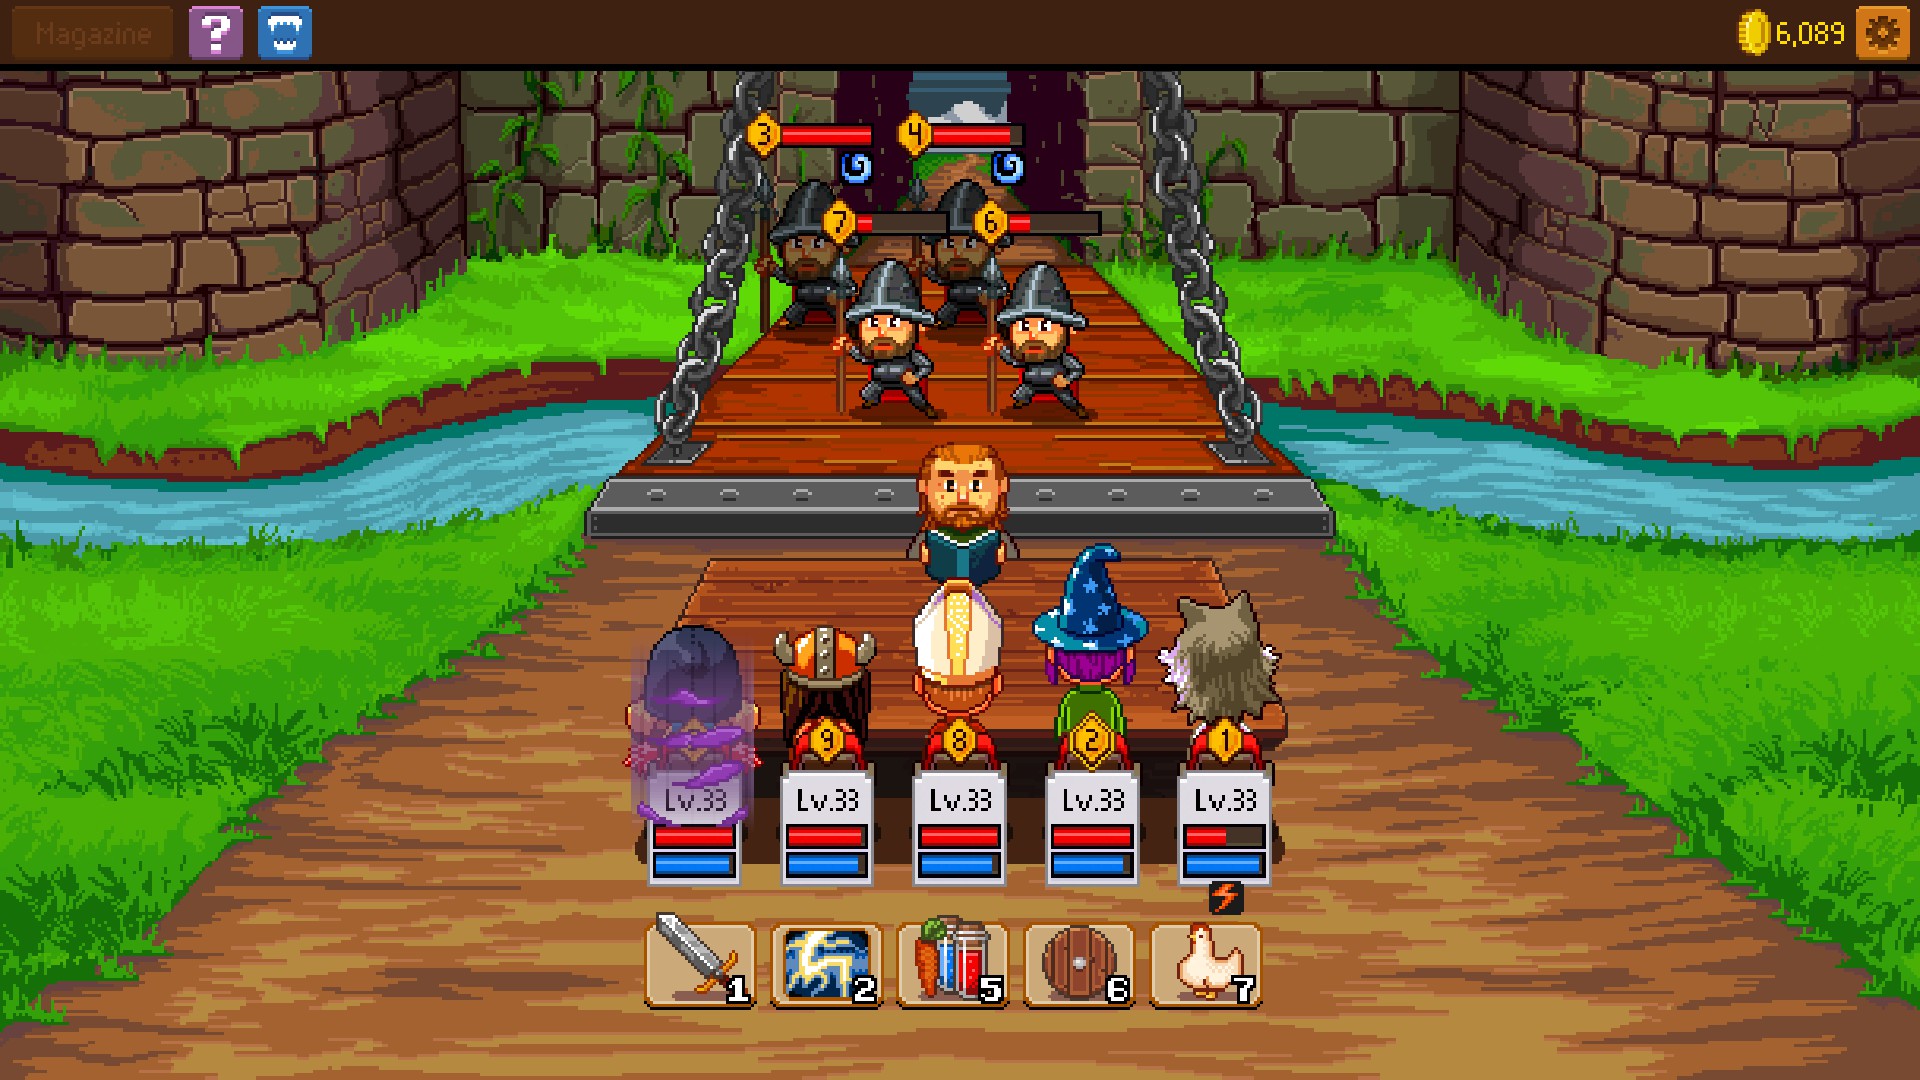 knights of pen and paper 2 cheats ps4